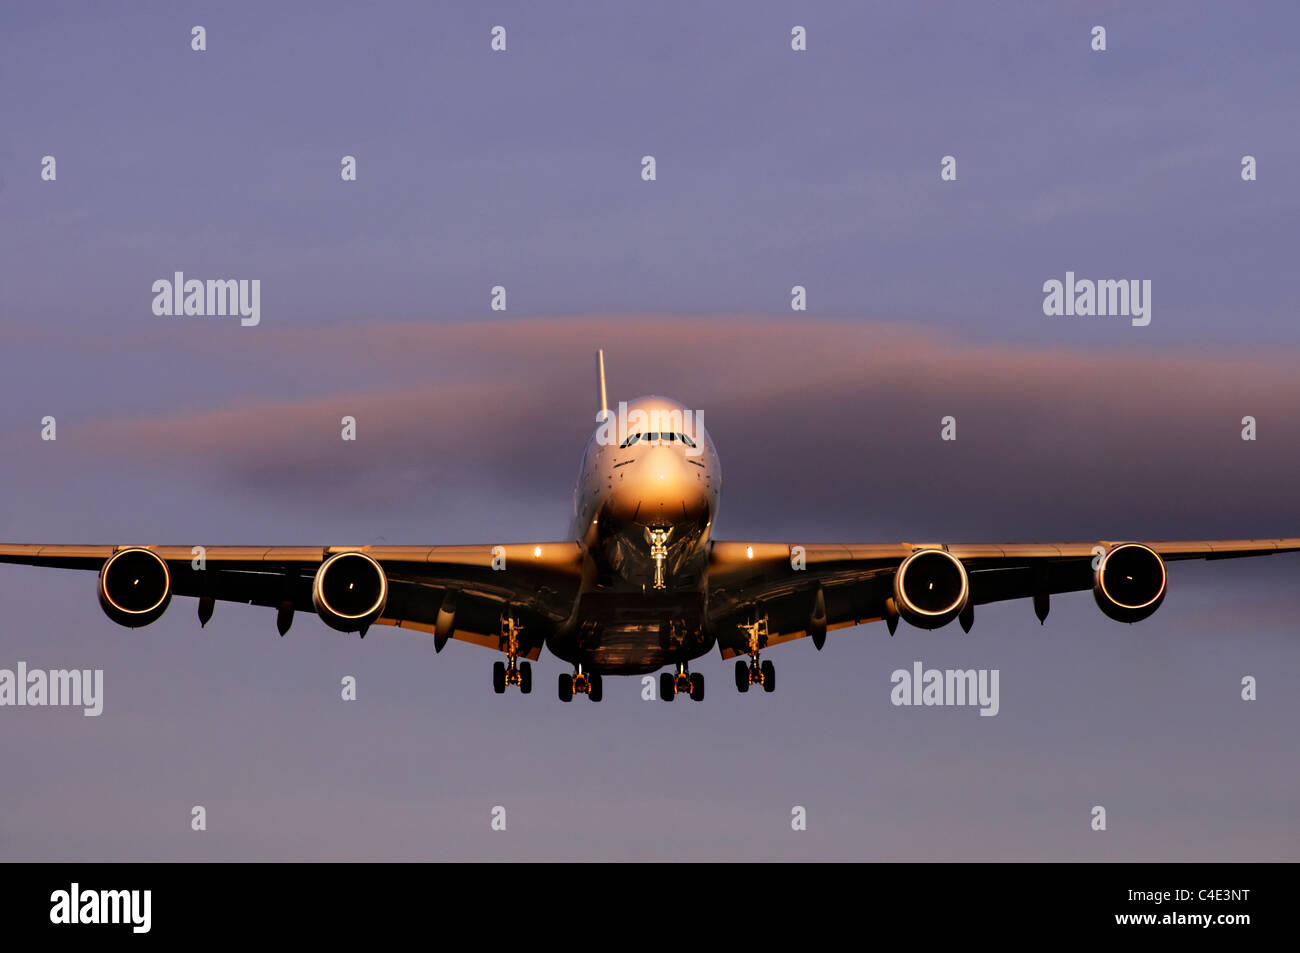 The Airbus A380 landing in the sunset Stock Photo